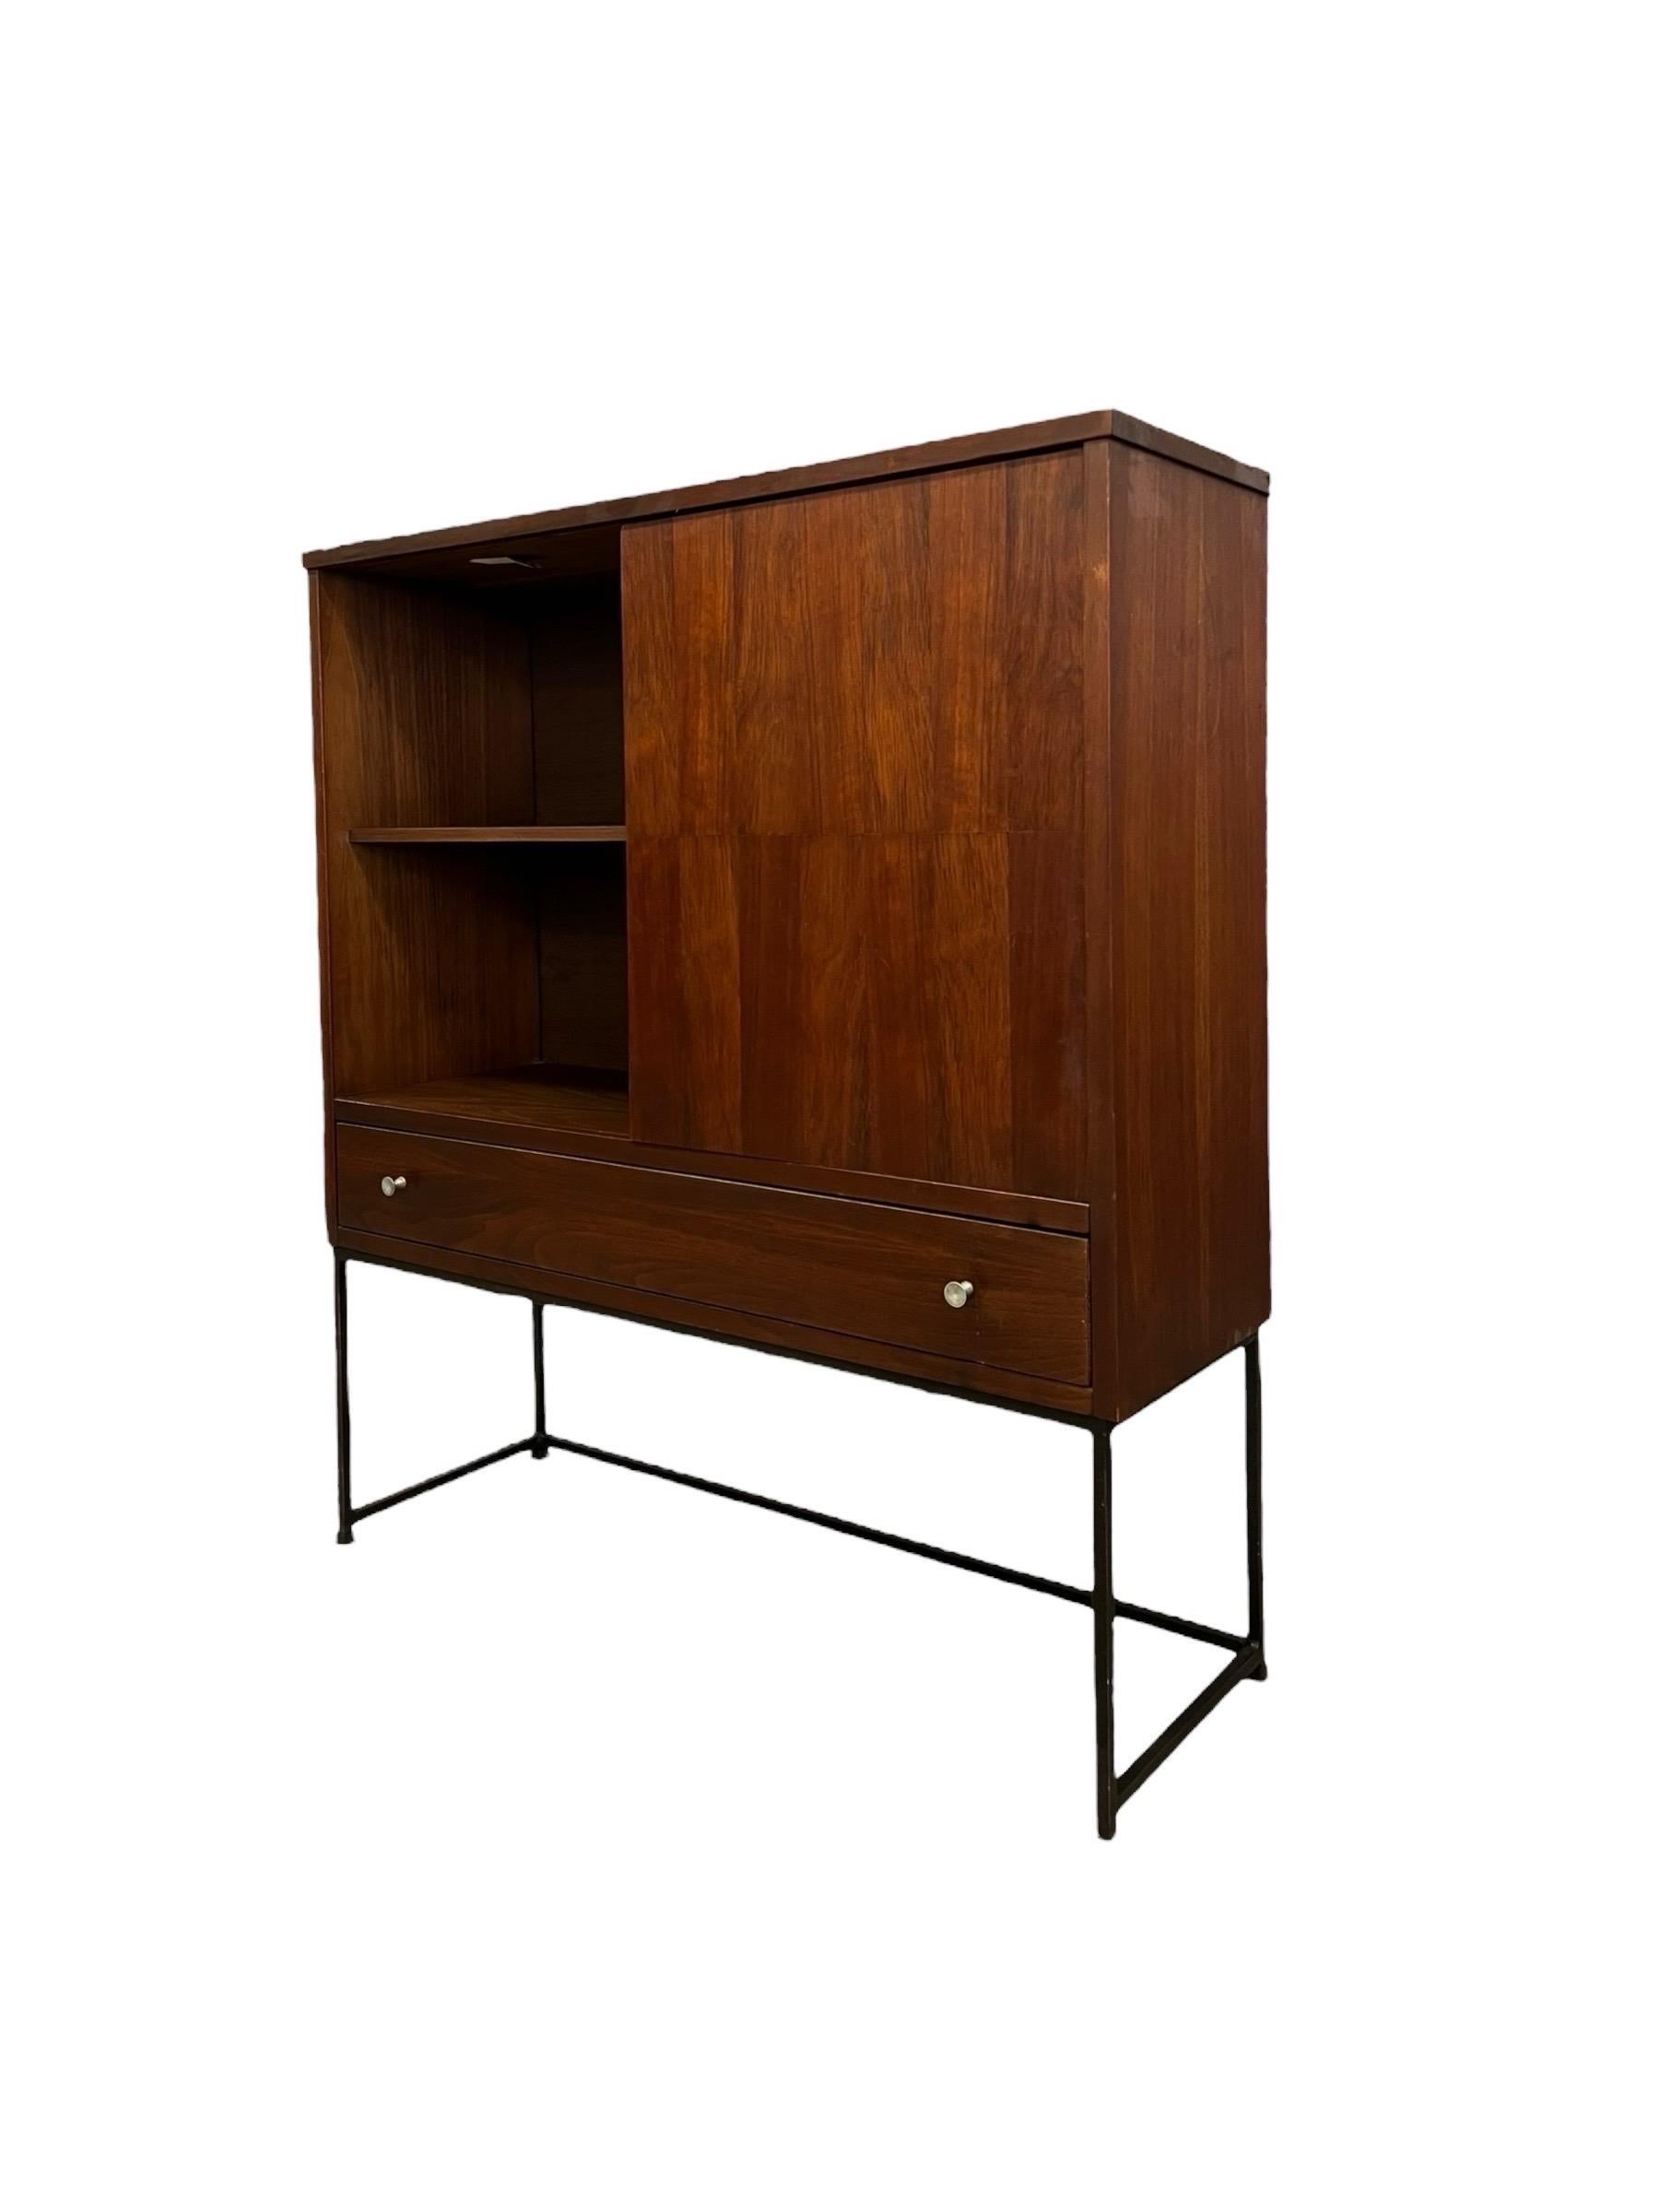 Mid-Century Modern Vintage Mid Century Modern Bookshelf With Sliding Door and Dovetailed Drawers For Sale